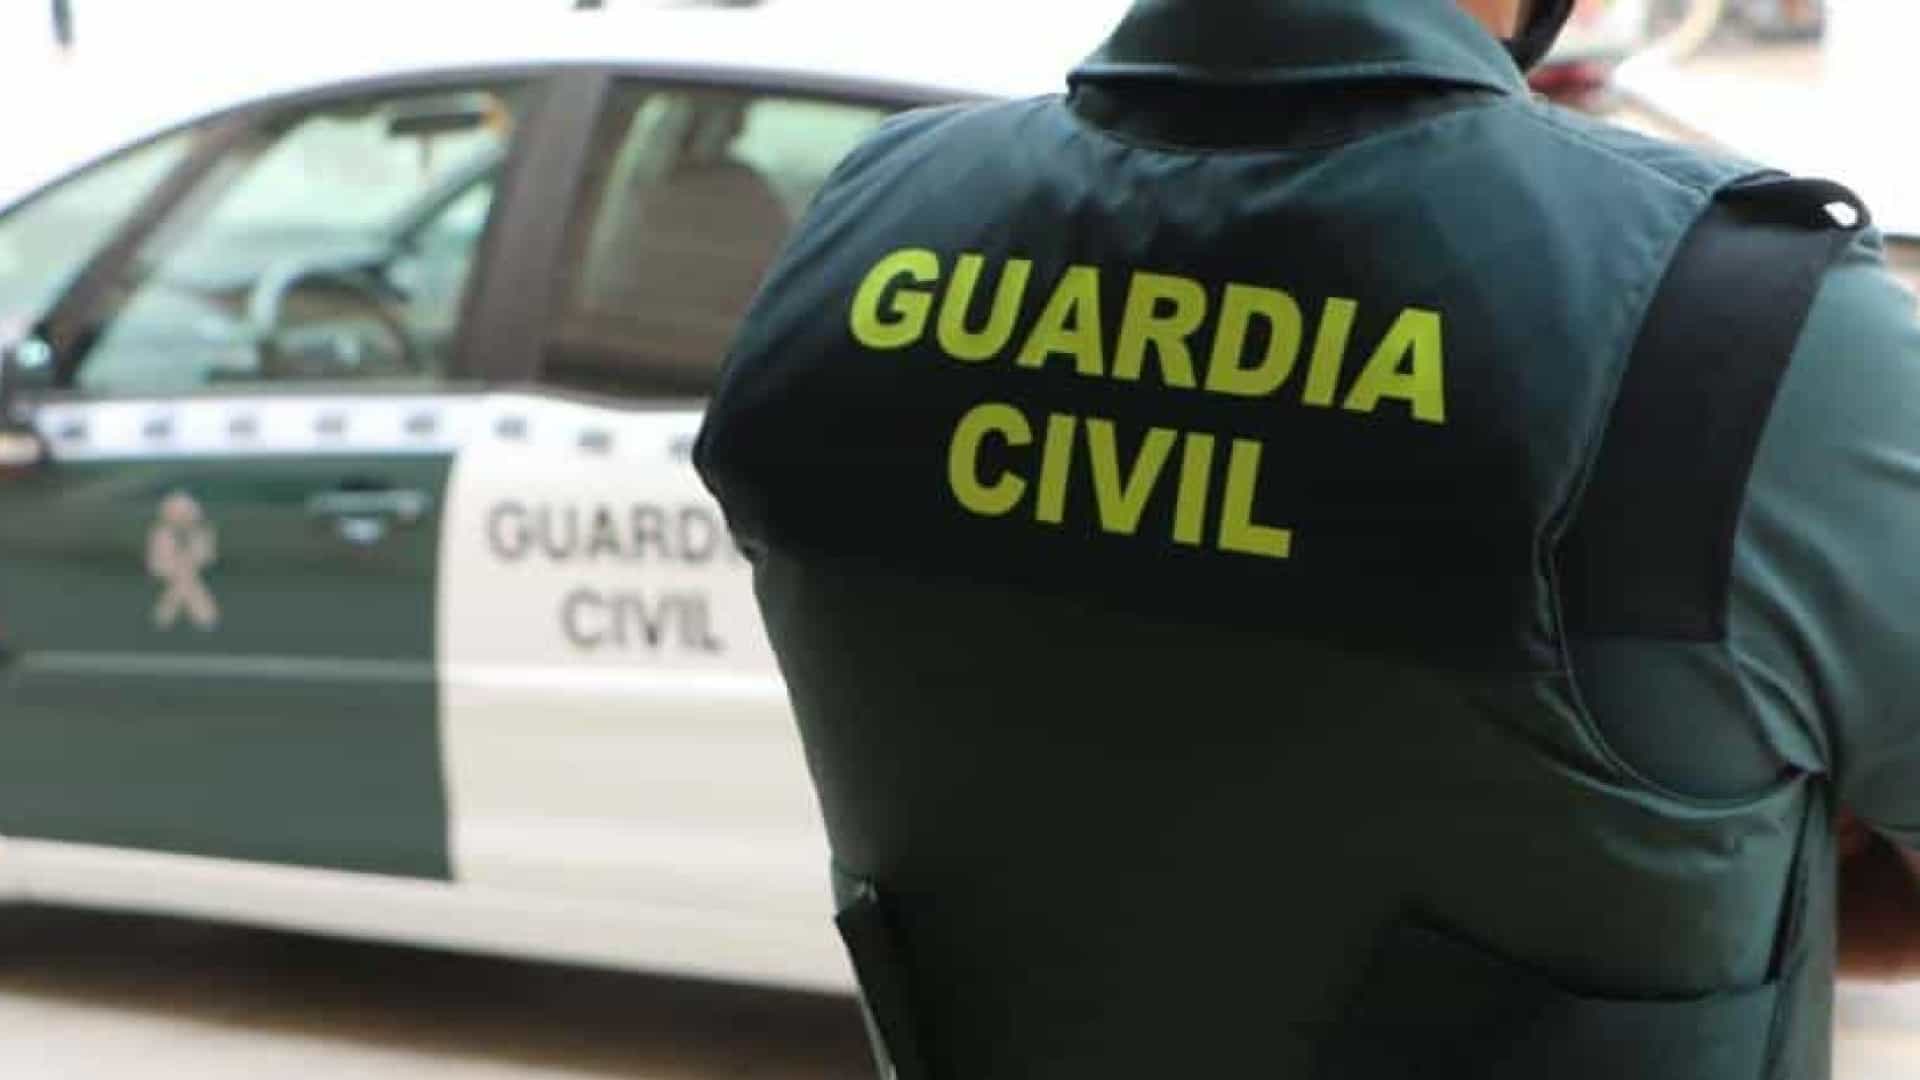 Young Portuguese man dies after being shot in Spain